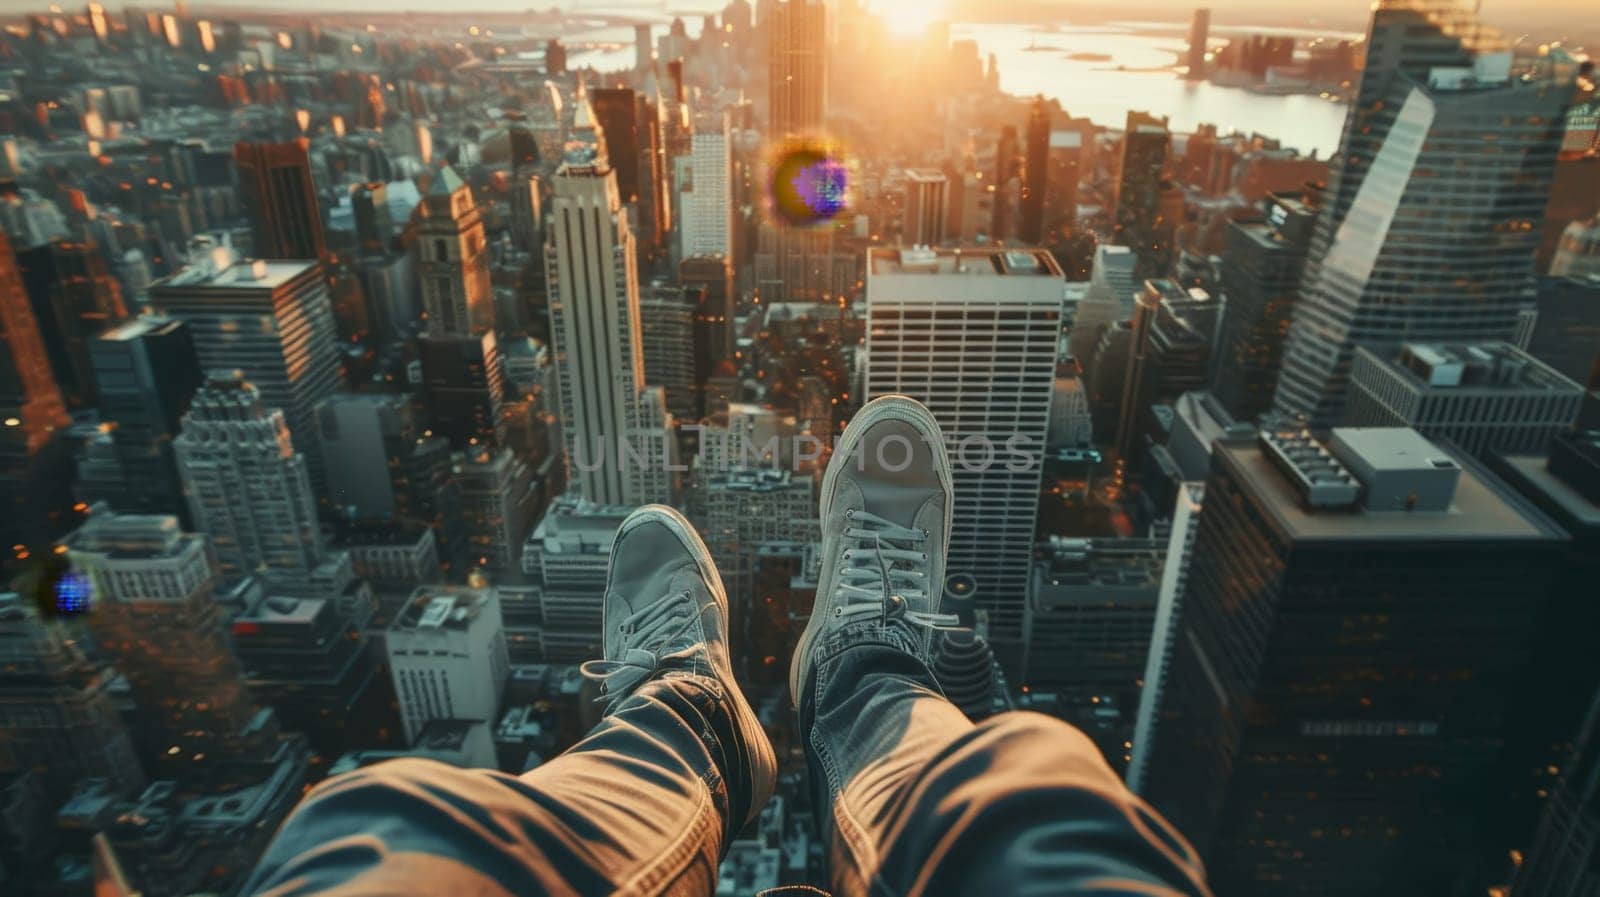 A person is taking a photo of a city from a high place. The city is lit up with the sun setting in the background